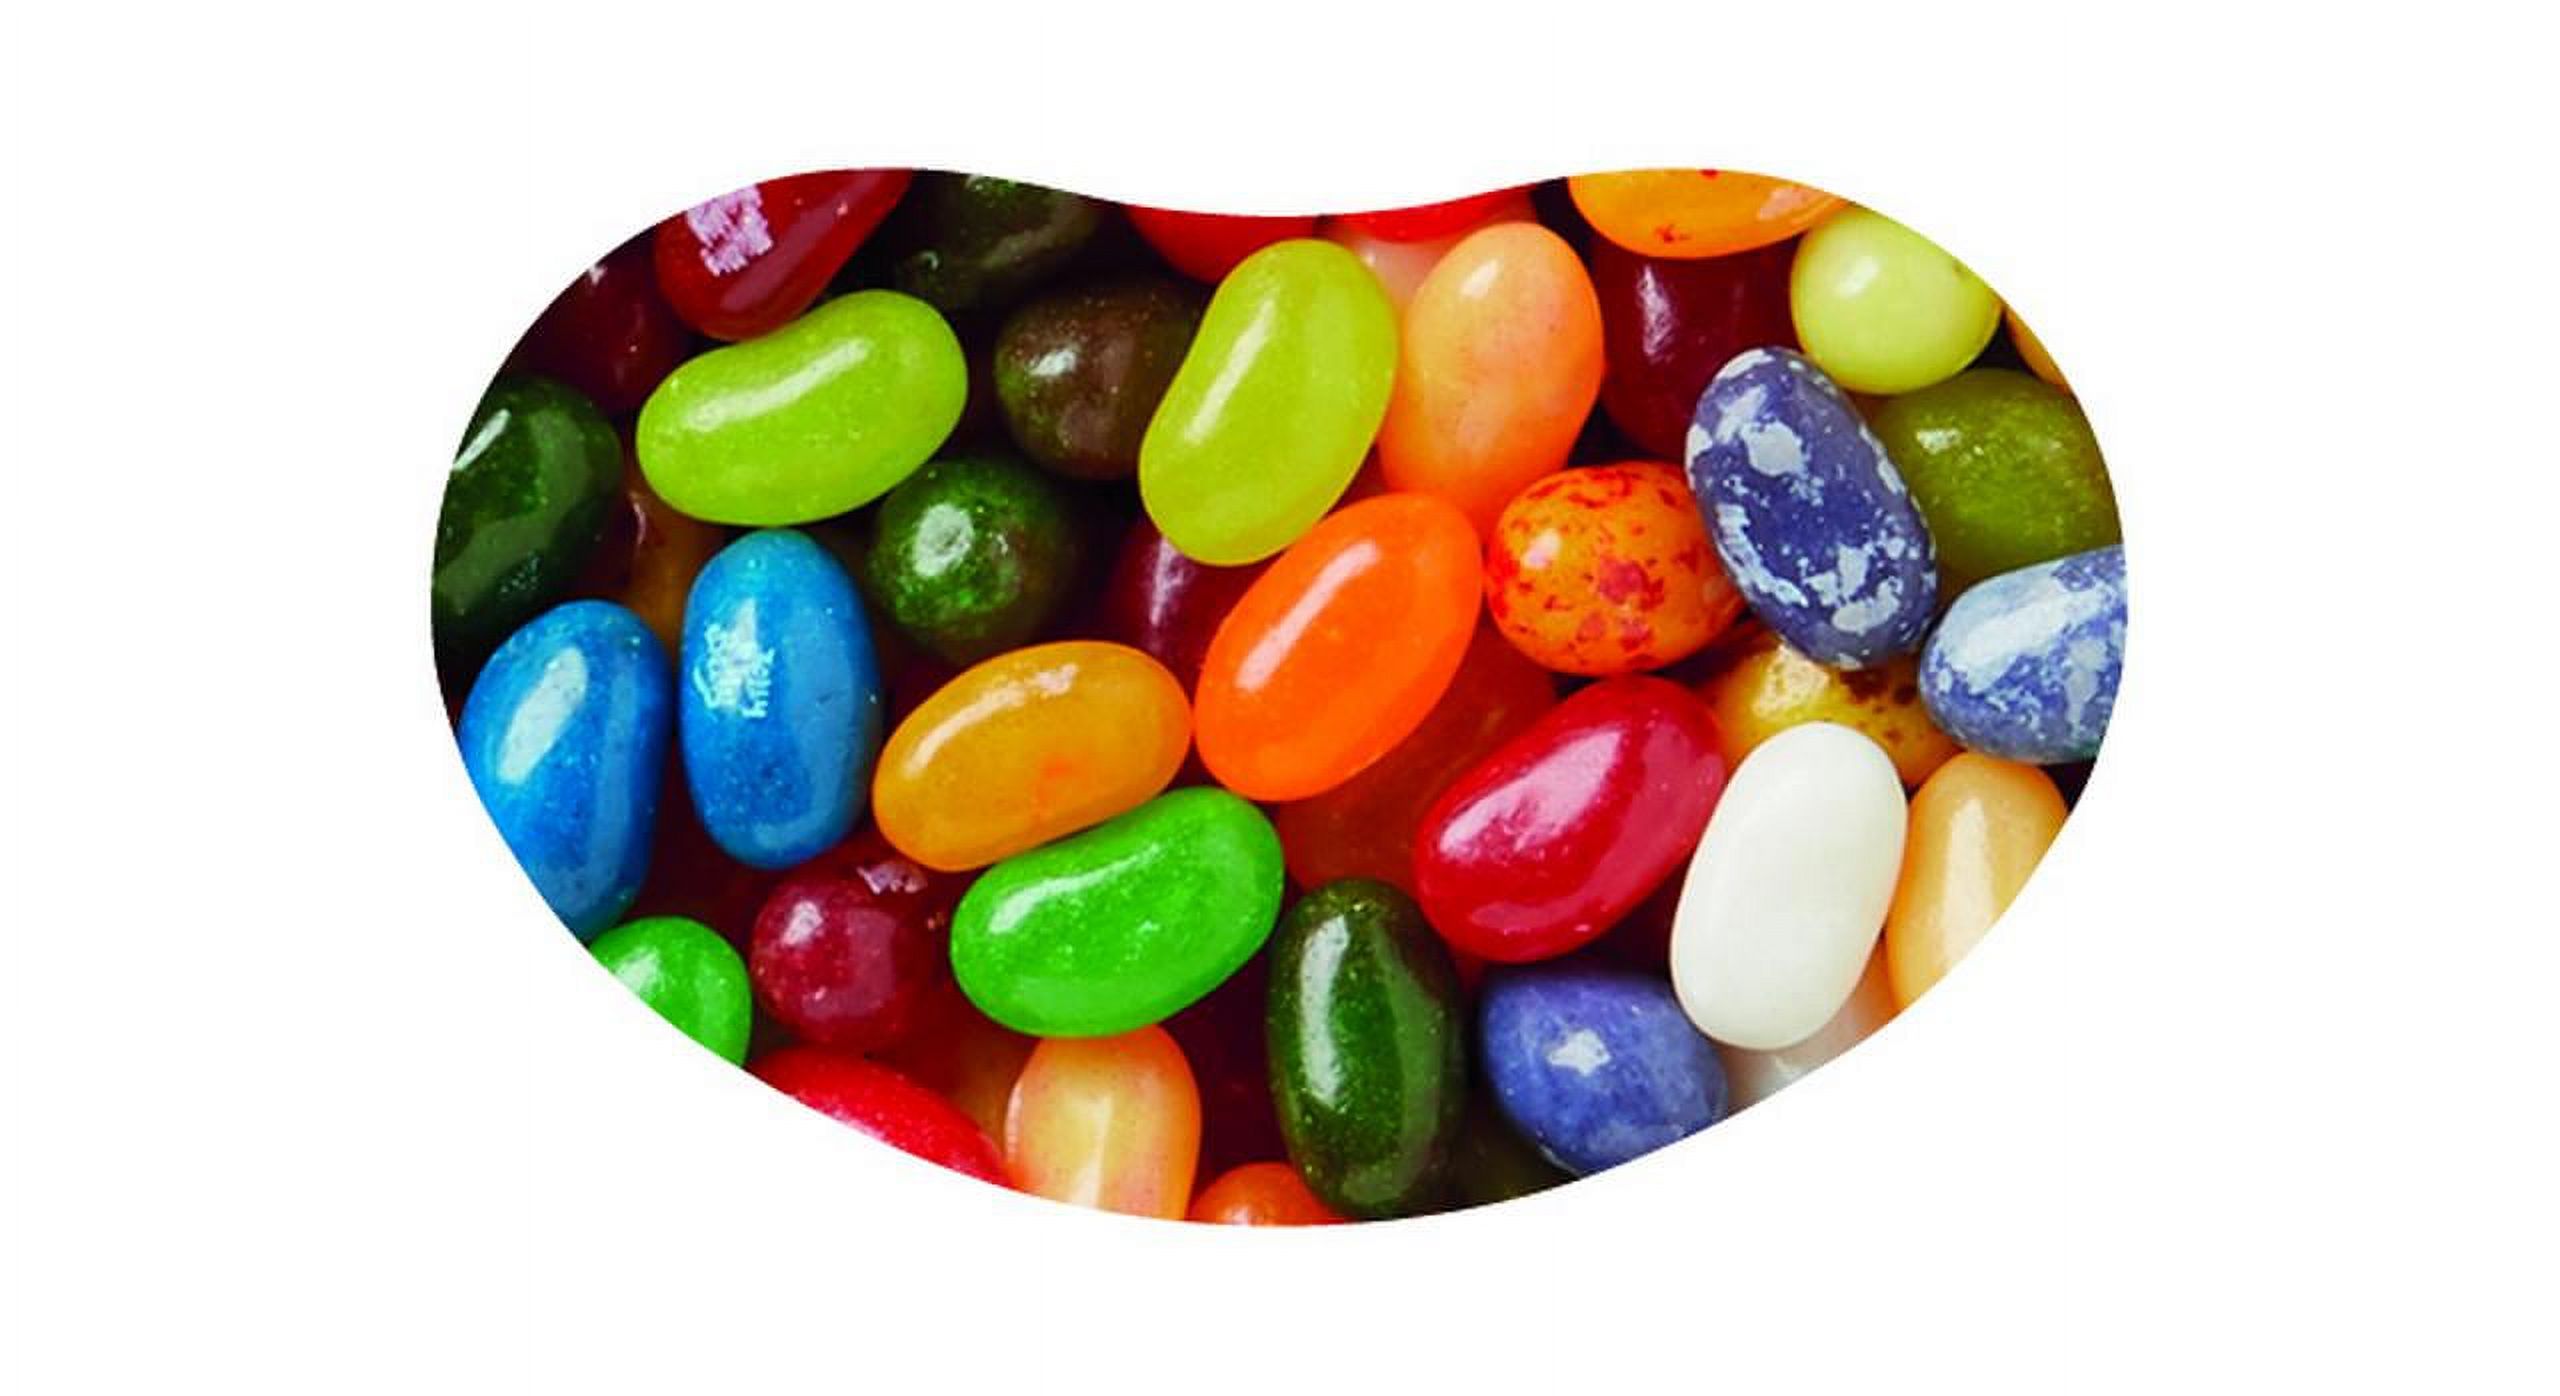 Jelly Belly Jelly Beans Candy, 40 Assorted Flavors, 8.25 oz Bag - image 2 of 5